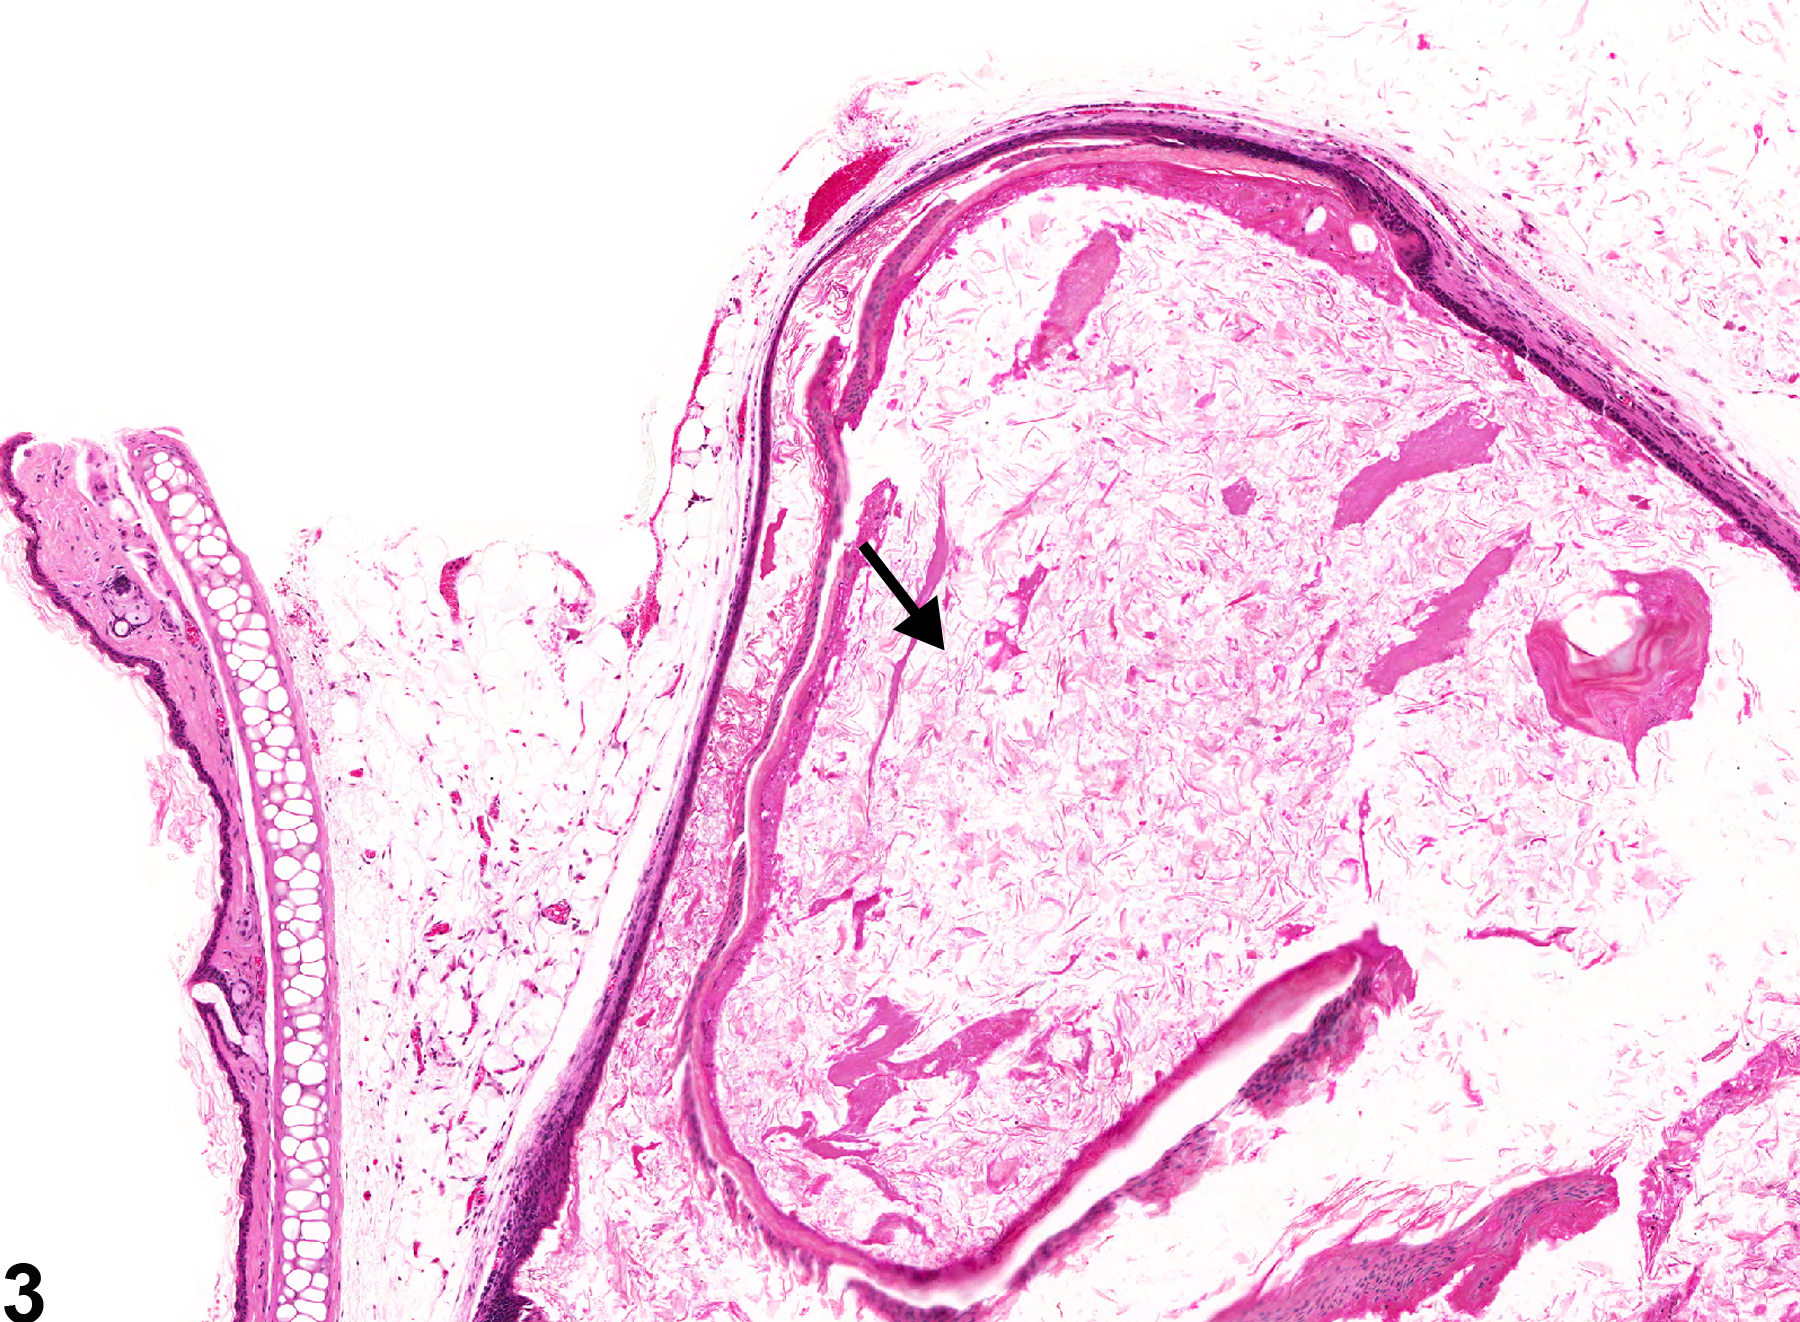 Image of canal dilation in the ear from a male B6C3F1 mouse in a chronic study